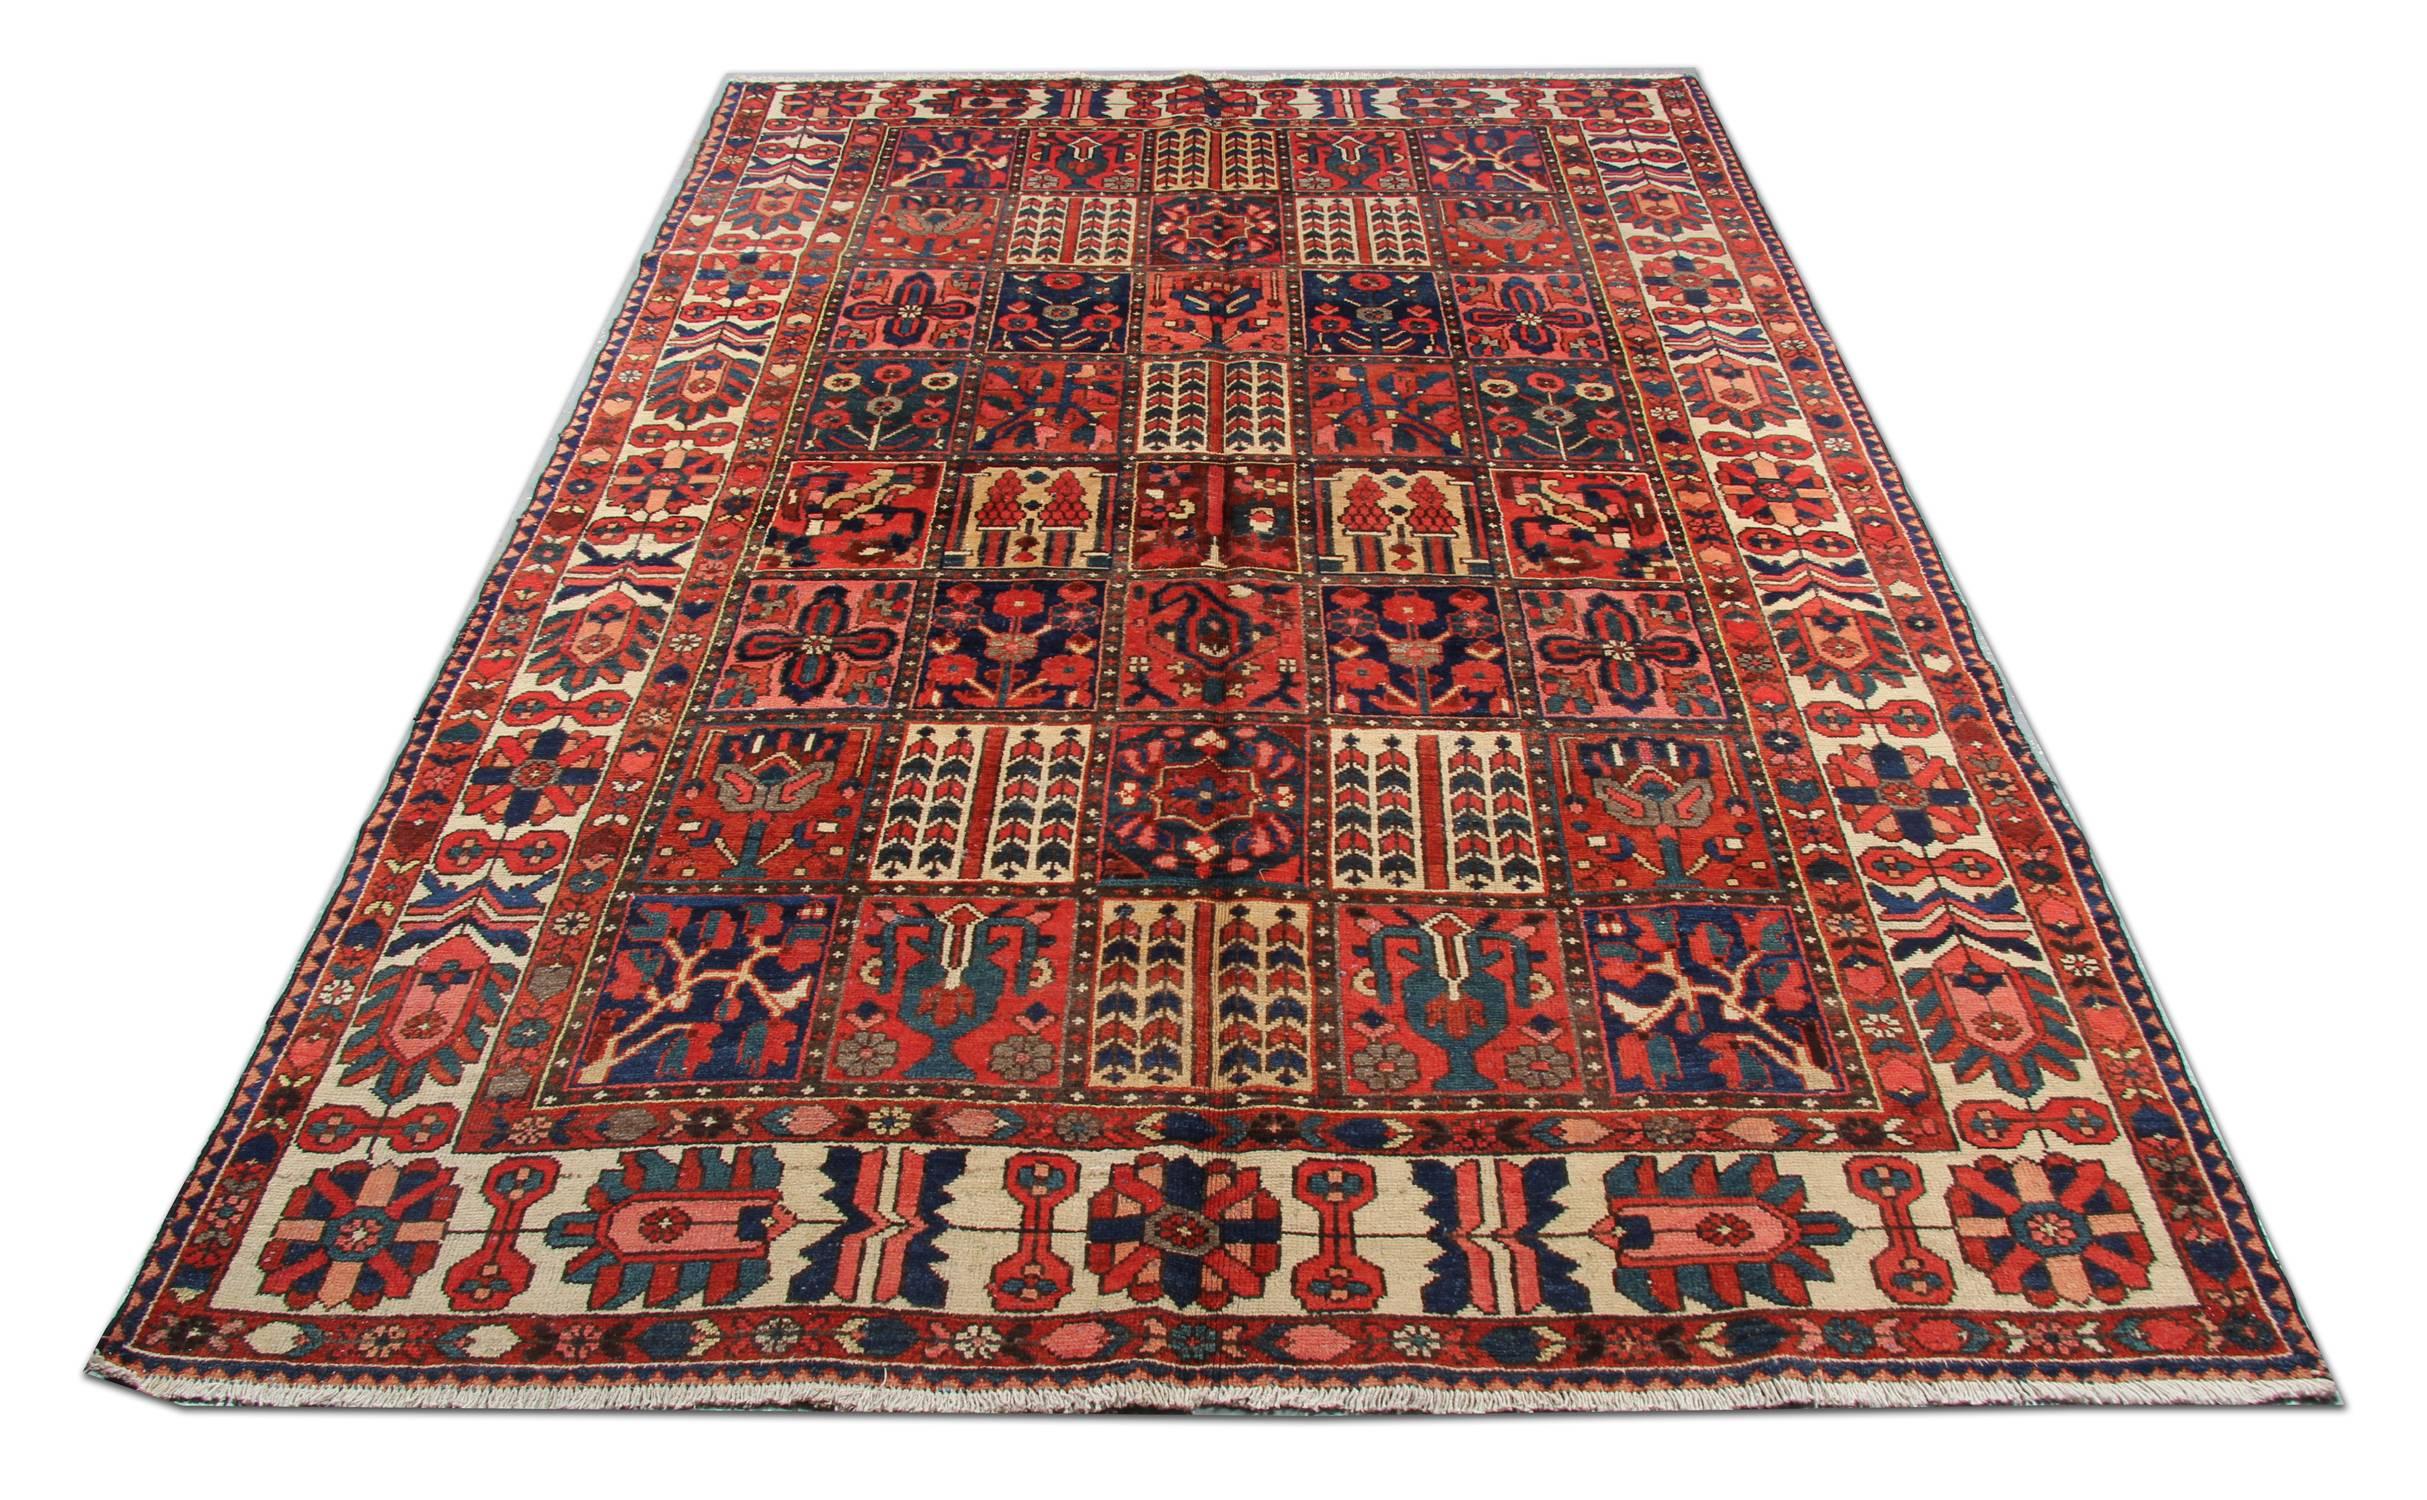 Vintage Persian Lori woven rug with the exquisite garden Persian rug designs and well over 60 years old. This floral rug was made in western Persia with Lori tribes. This tribal rug was also made with hand spun wool and using only organic dyes. This